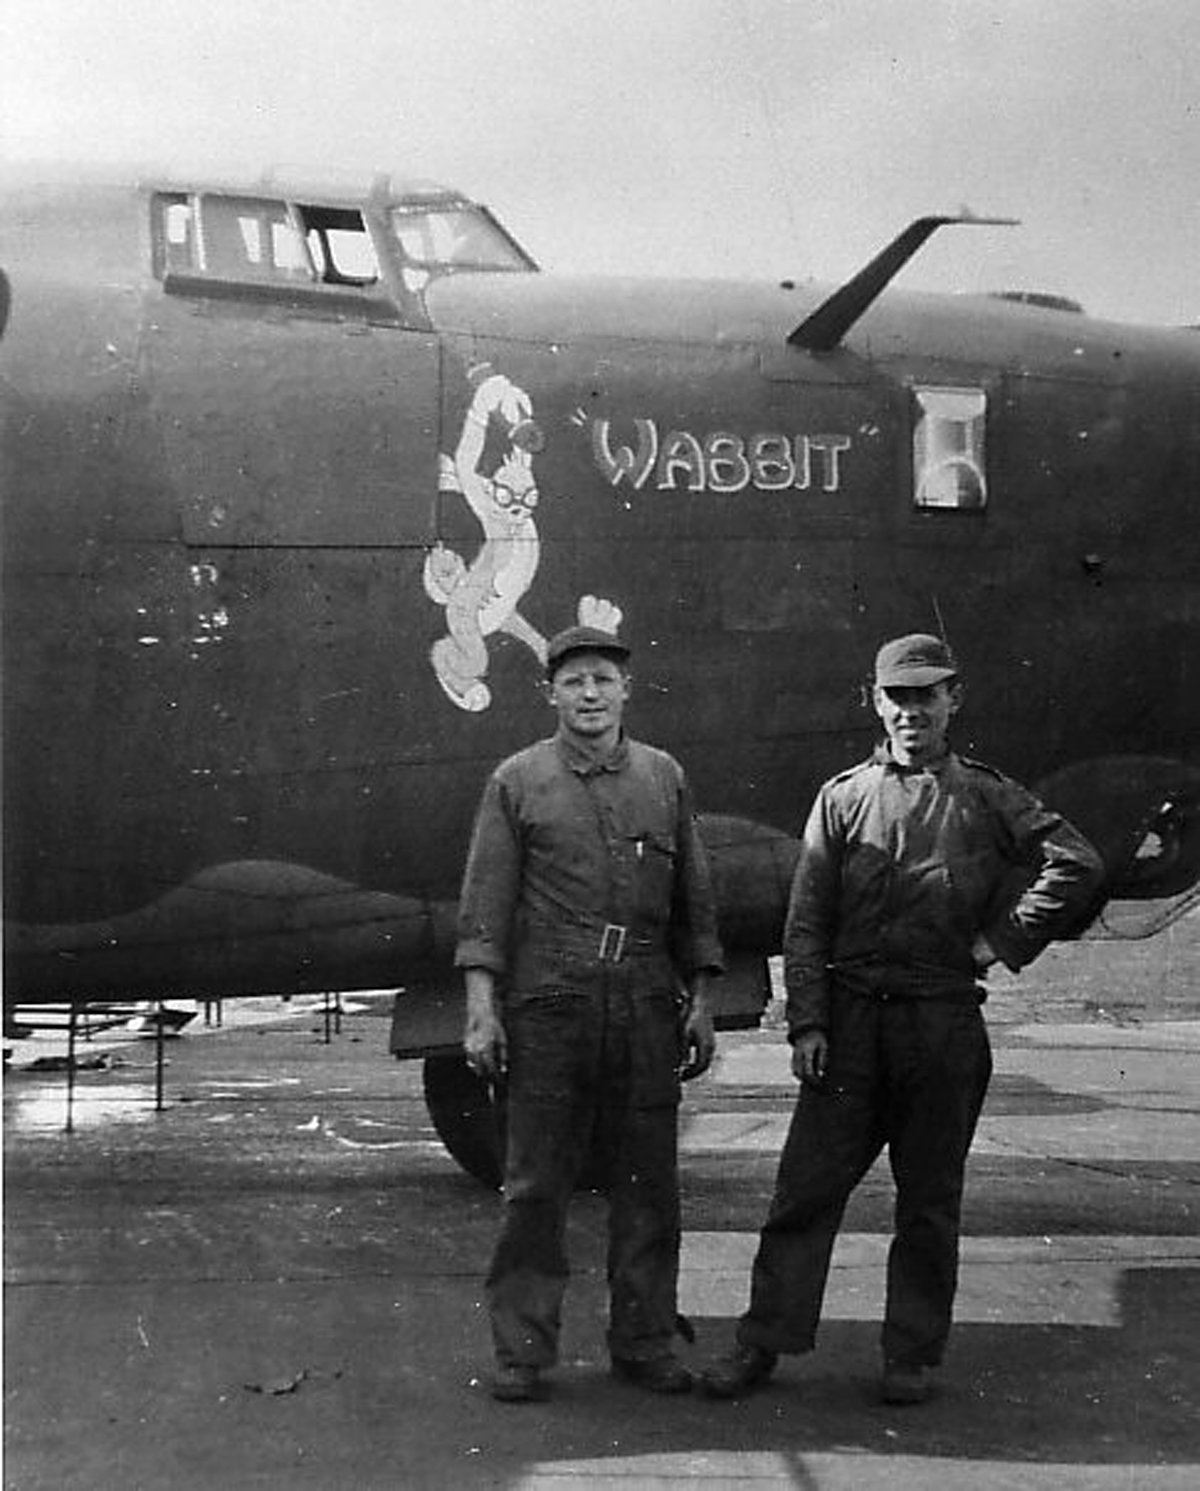 Joe Haenn and a fellow service member in front of the B-24 known as the “Wabbit.”